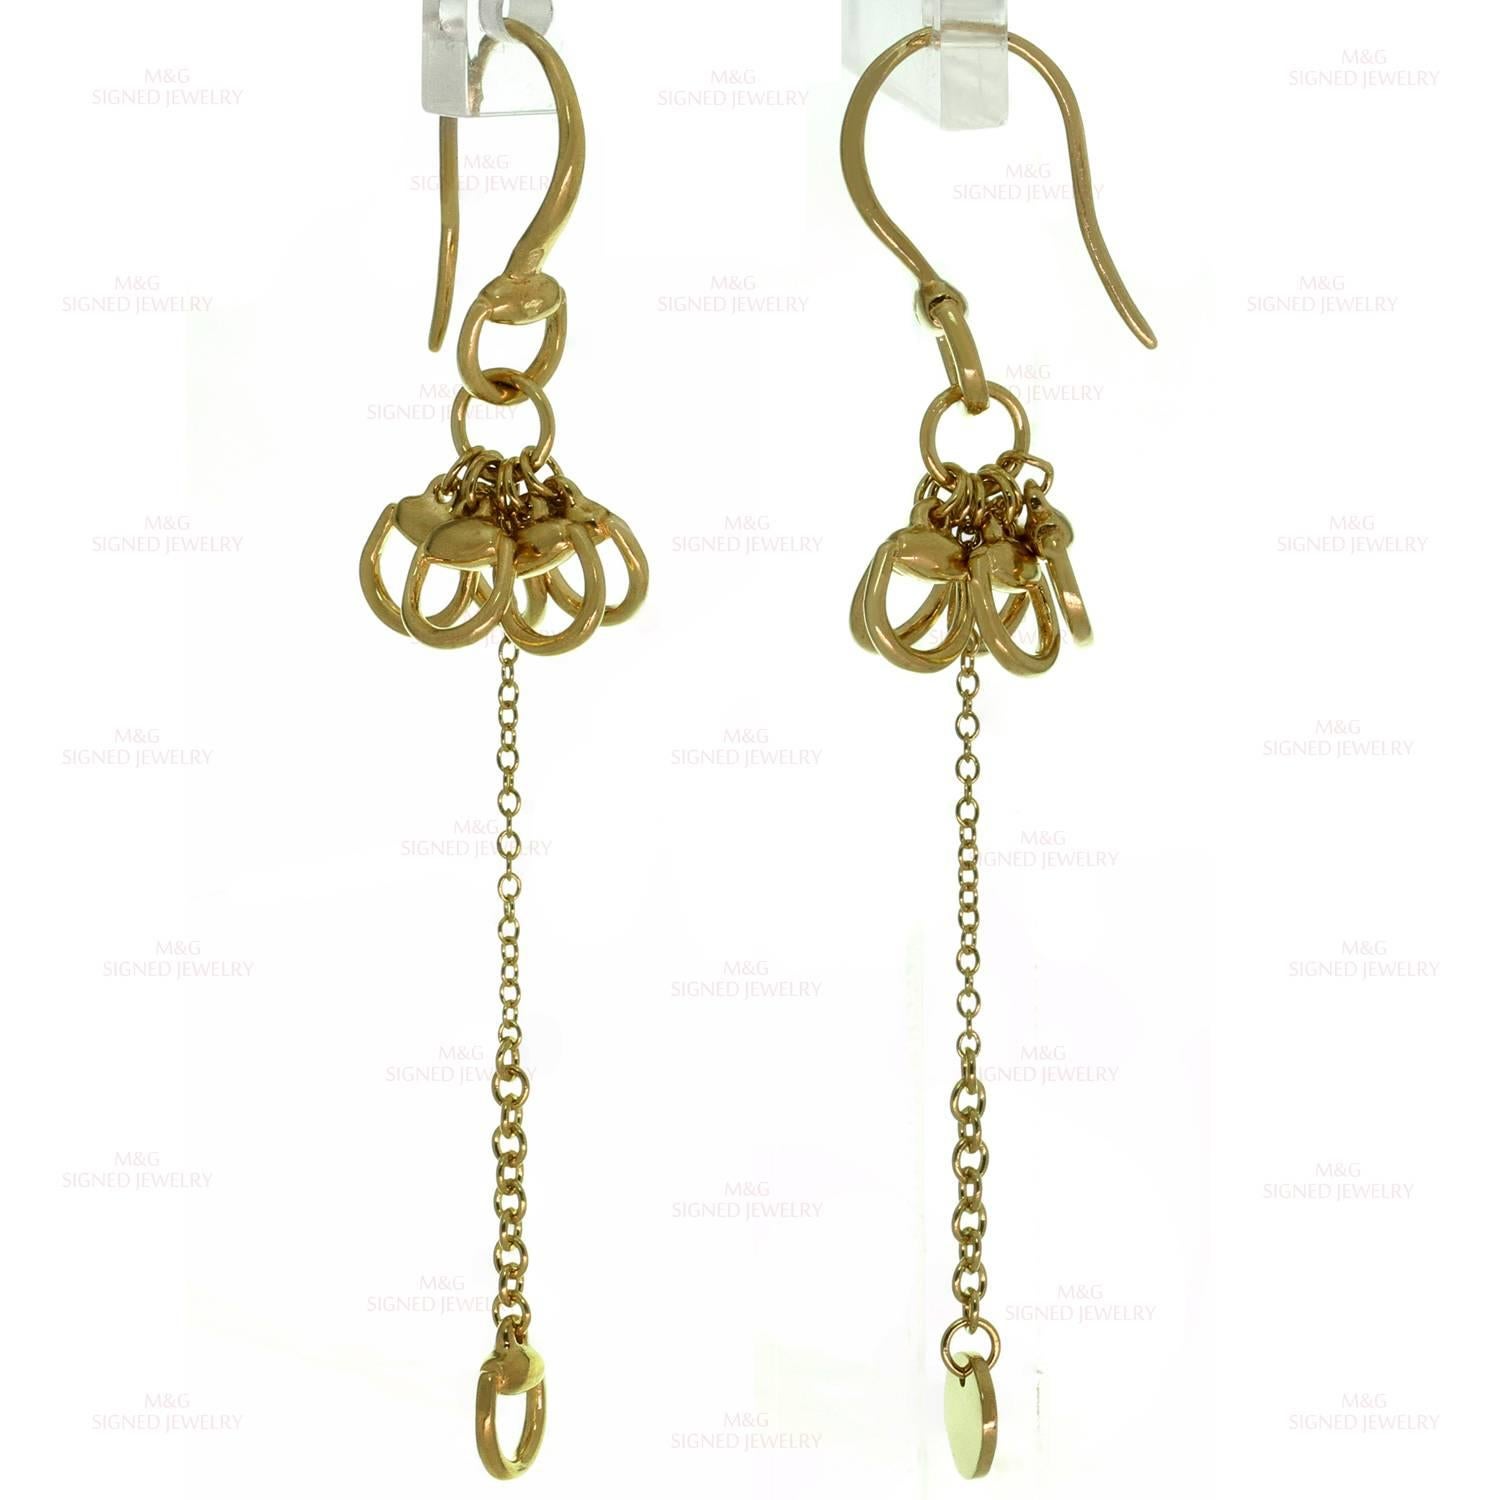 Gucci Horsebit Yellow Gold Necklace and Dangle Earrings Set 3